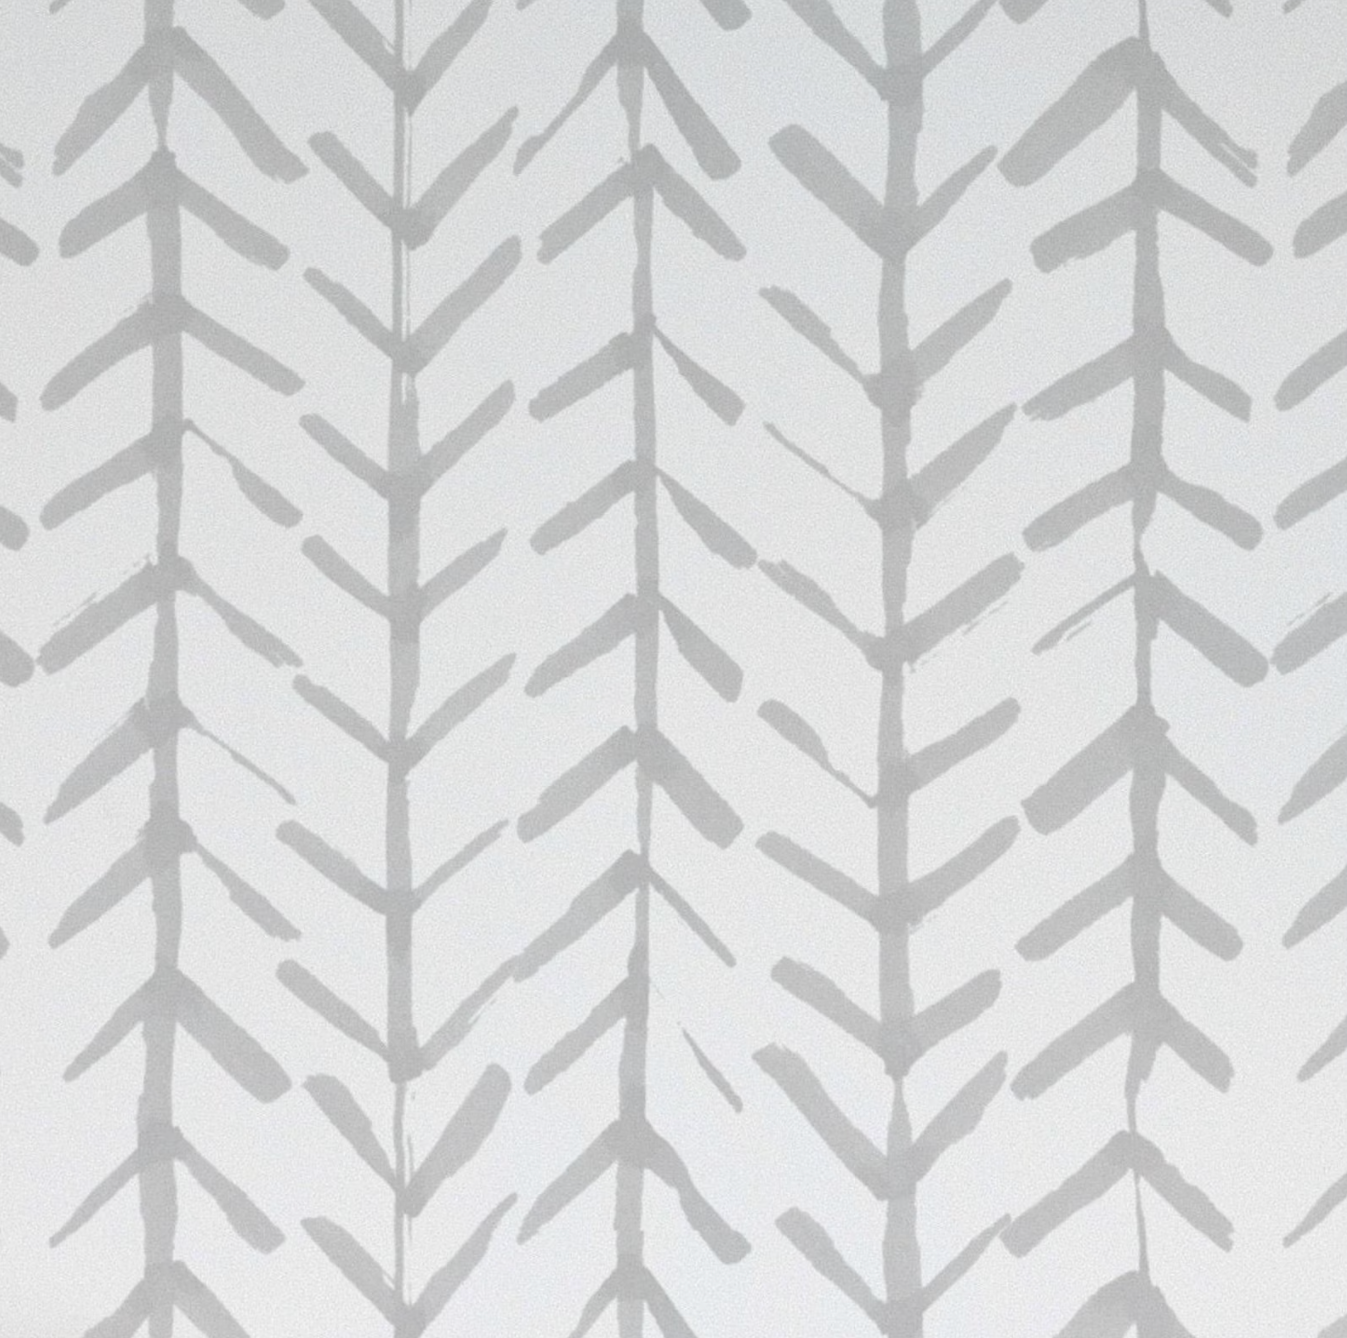 A detailed view of the Hand Painted Chevron Arrow Wallpaper showcasing a repetitive pattern of hand-painted gray chevron arrows on a white background, evoking a sense of rustic charm and artisanal craftsmanship